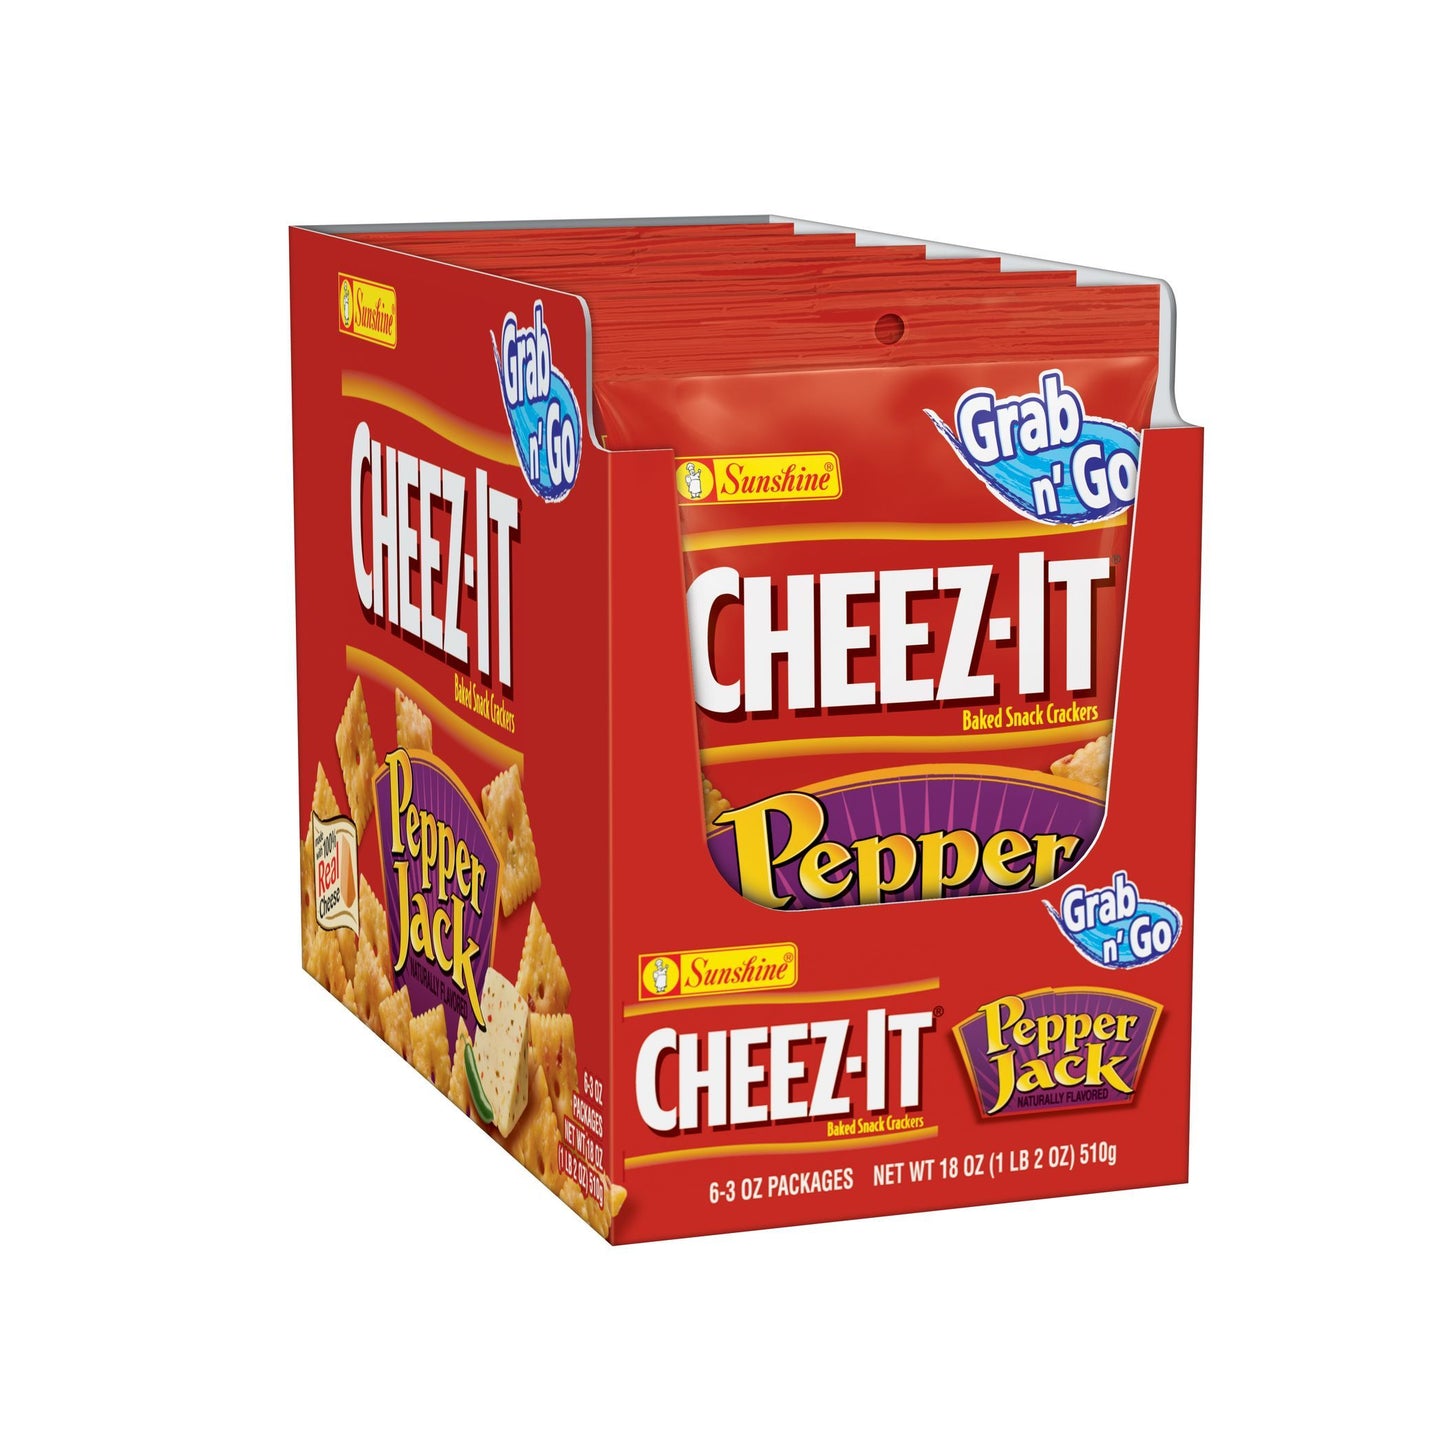 Cheez-It Pepper Jack 3oz (Pack of 6)